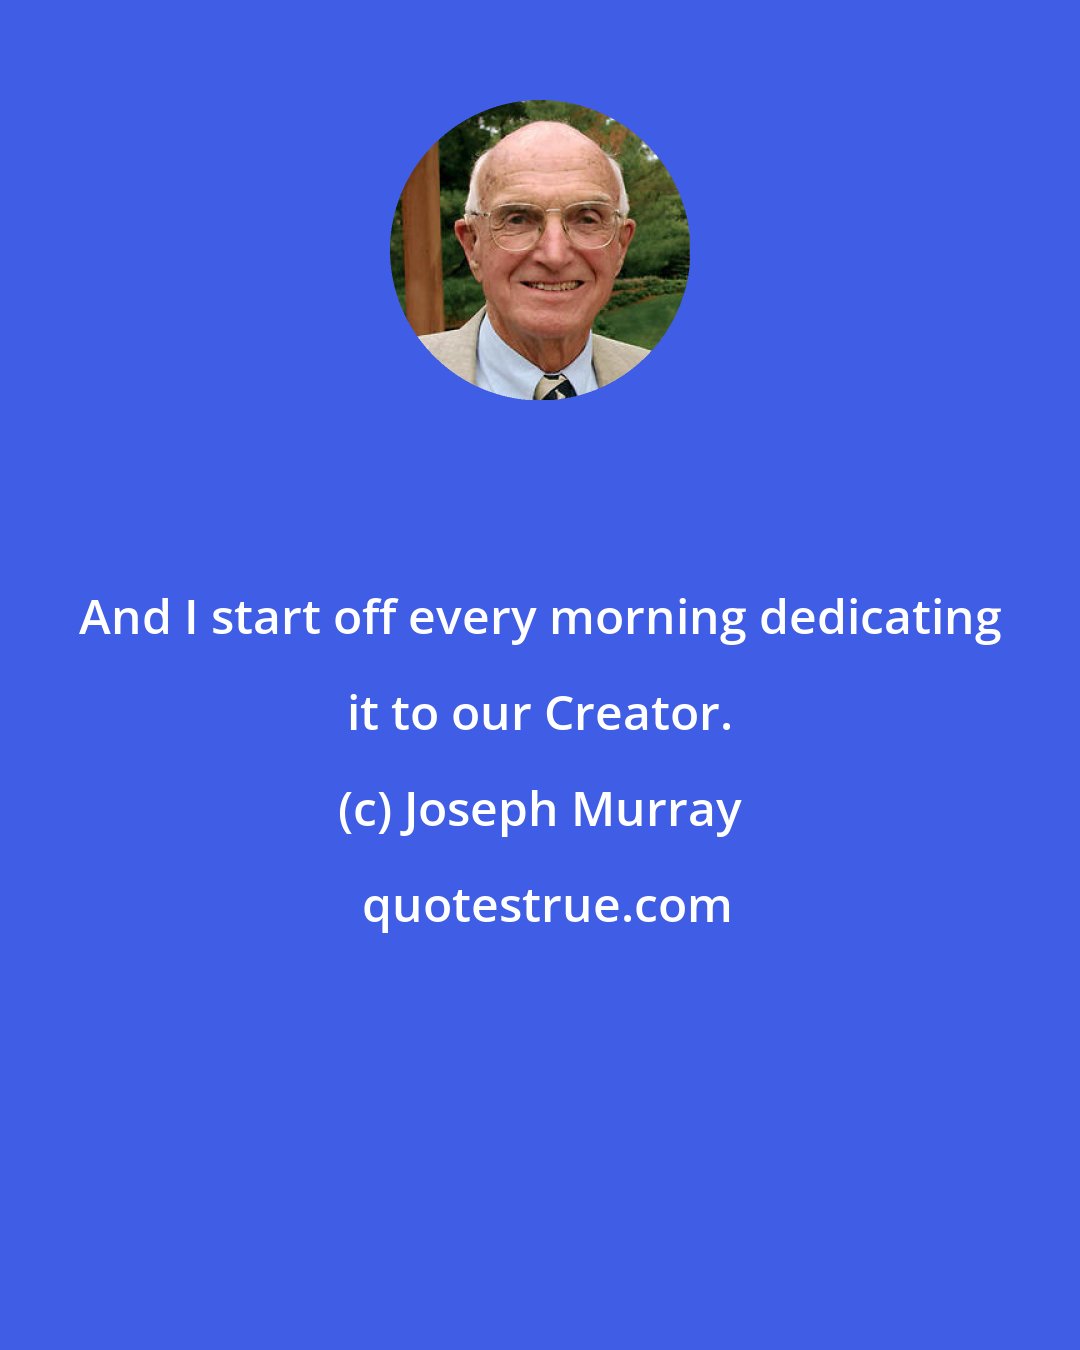 Joseph Murray: And I start off every morning dedicating it to our Creator.